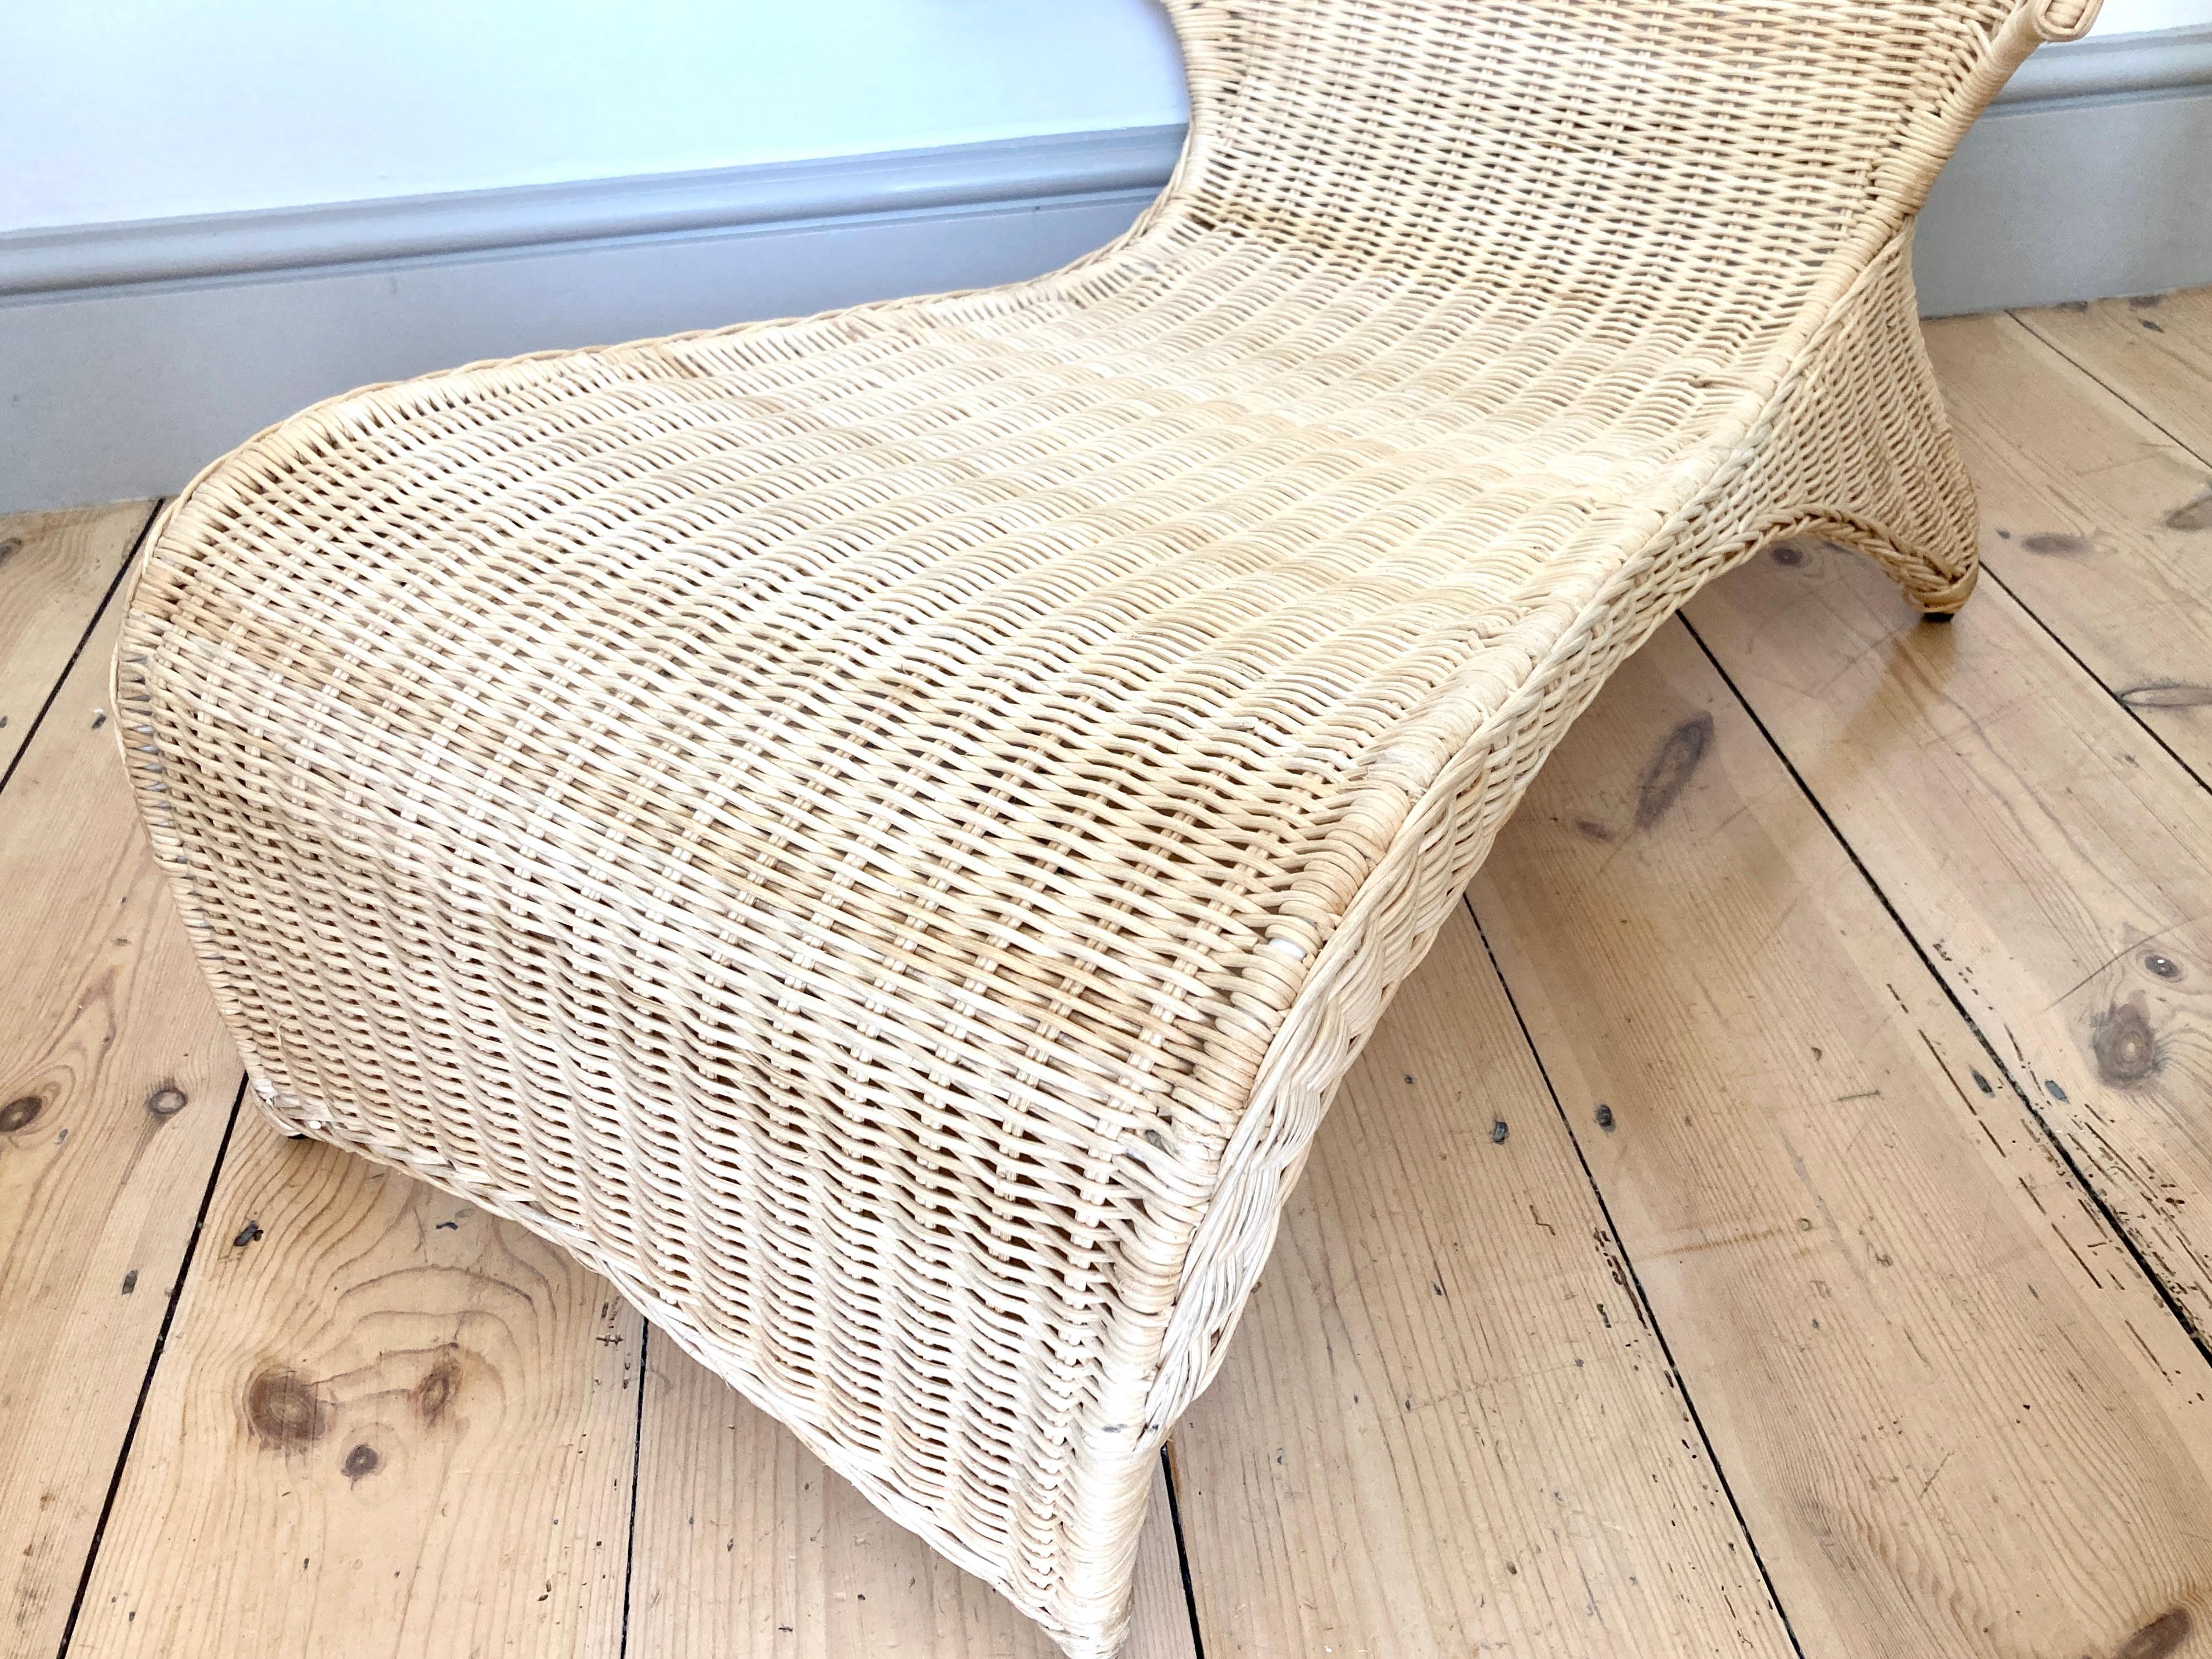 Low Lounge Chair / Chaise Longue by Monika Mulder for Ikea Savo Natural Rattan 1